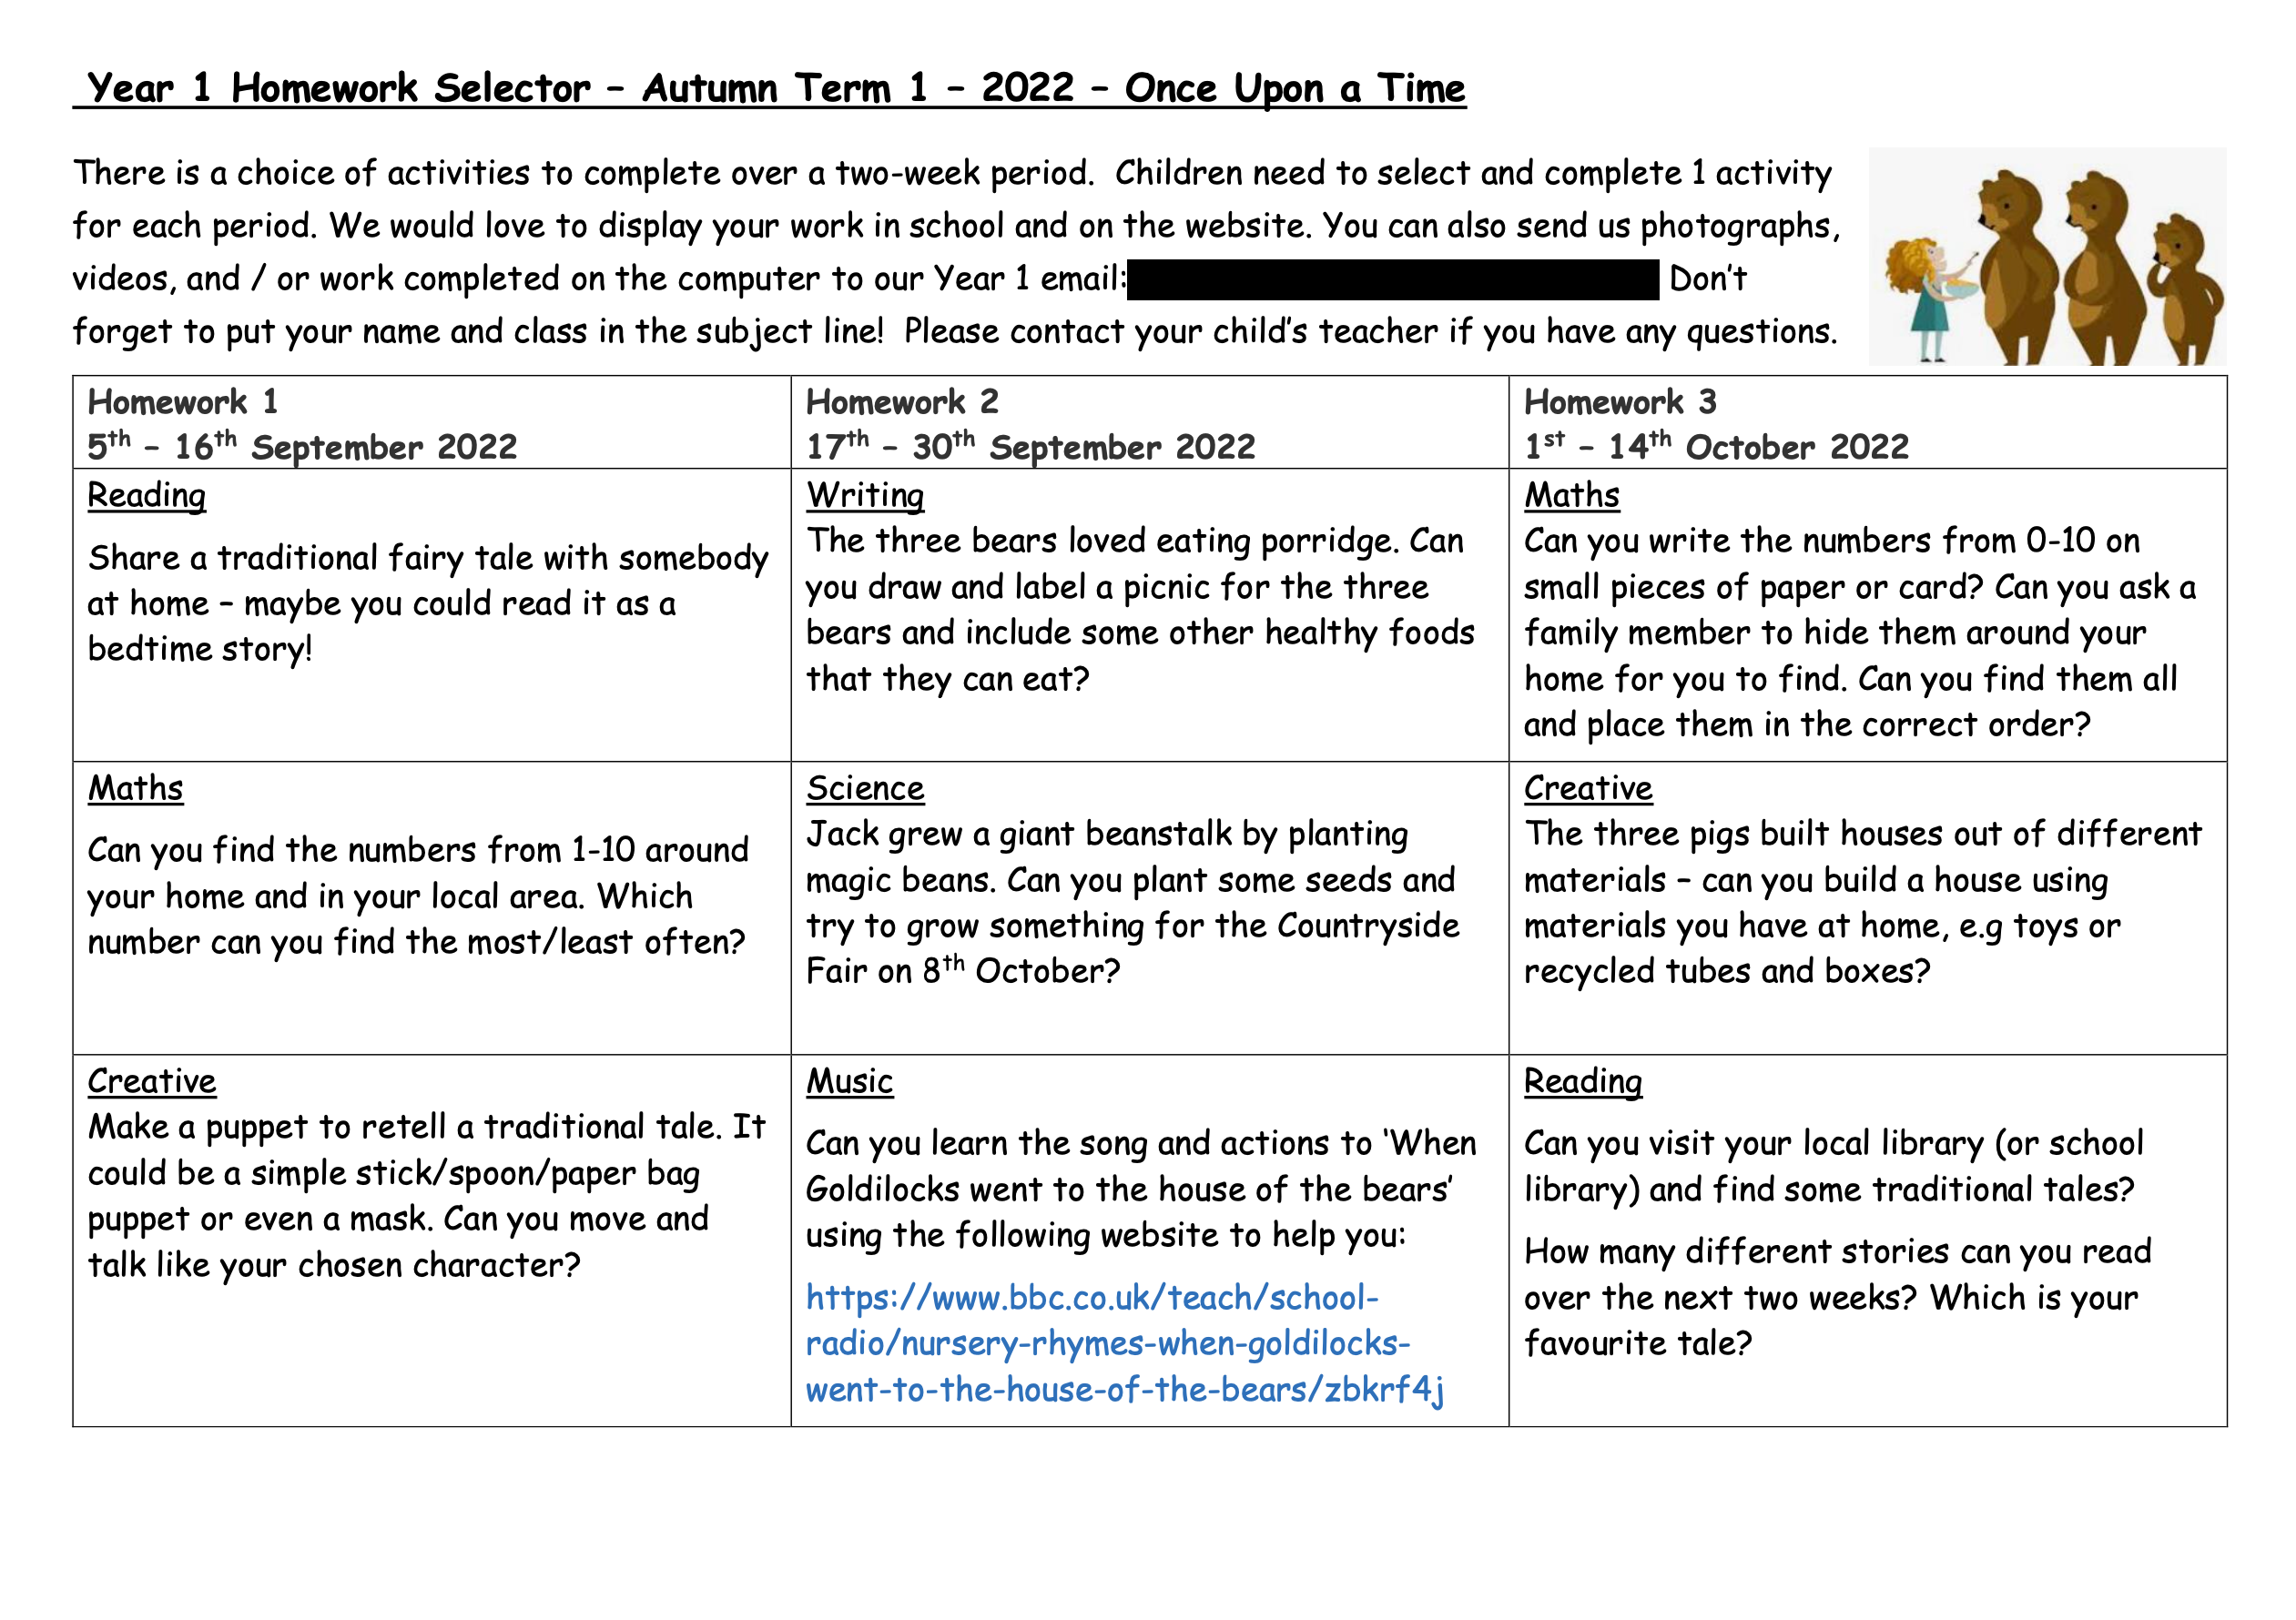 Homework sheet for Year 1 showing a range of tasks by week.